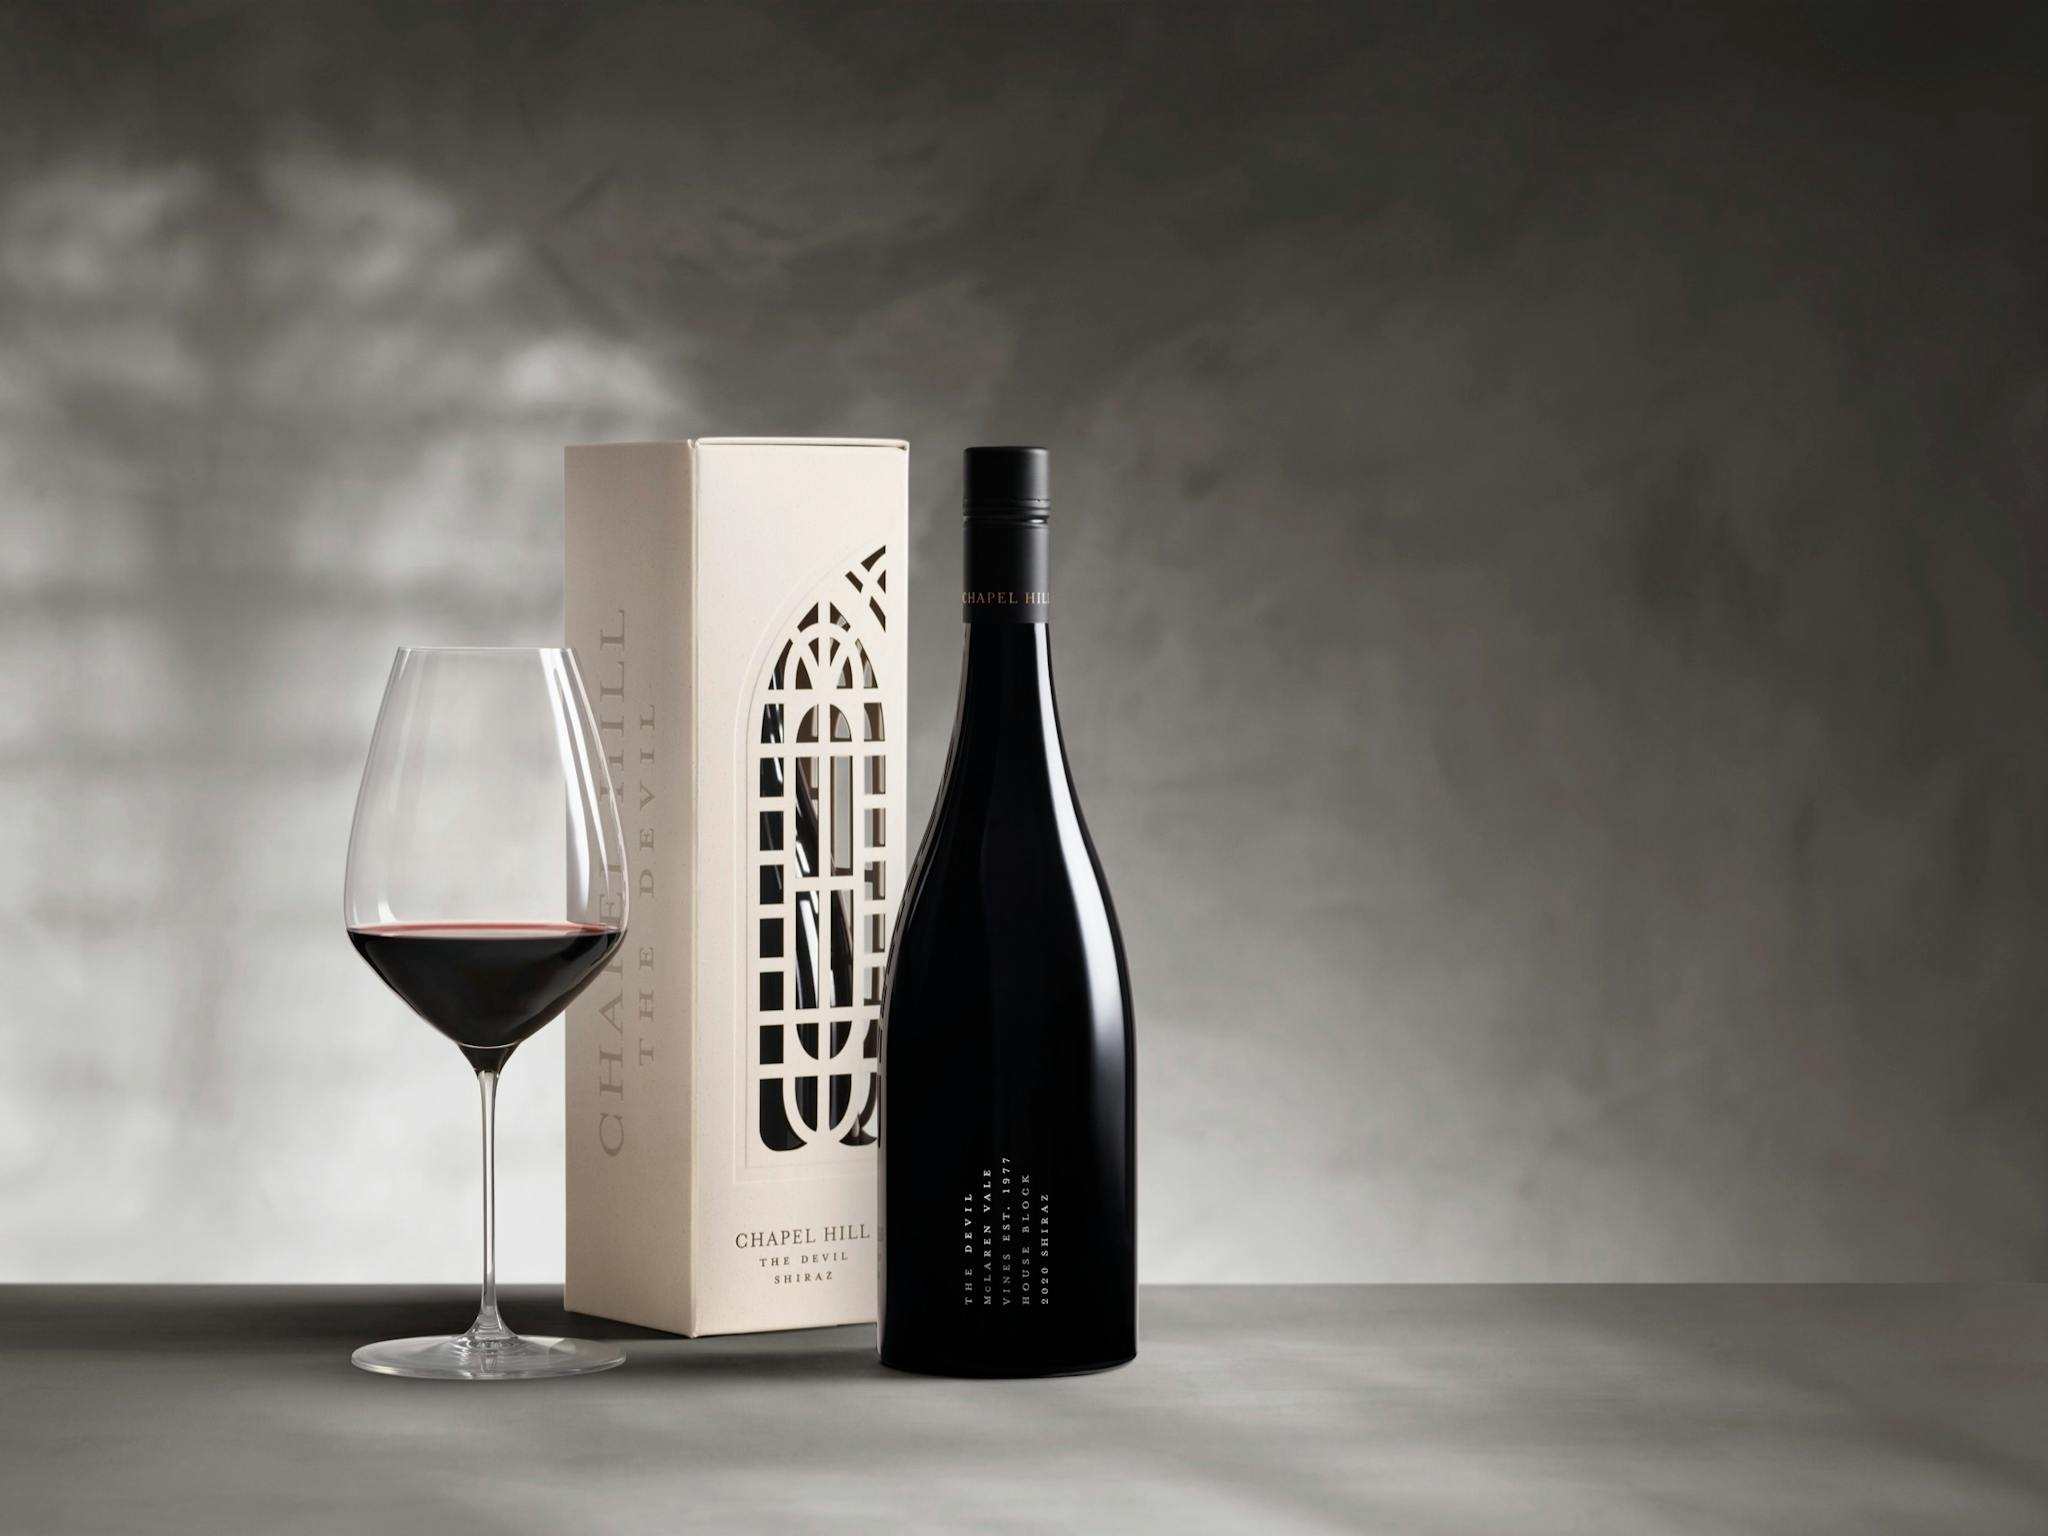 An elegant, screen printed wine bottle with a laser cut white box showing the chapel hill window